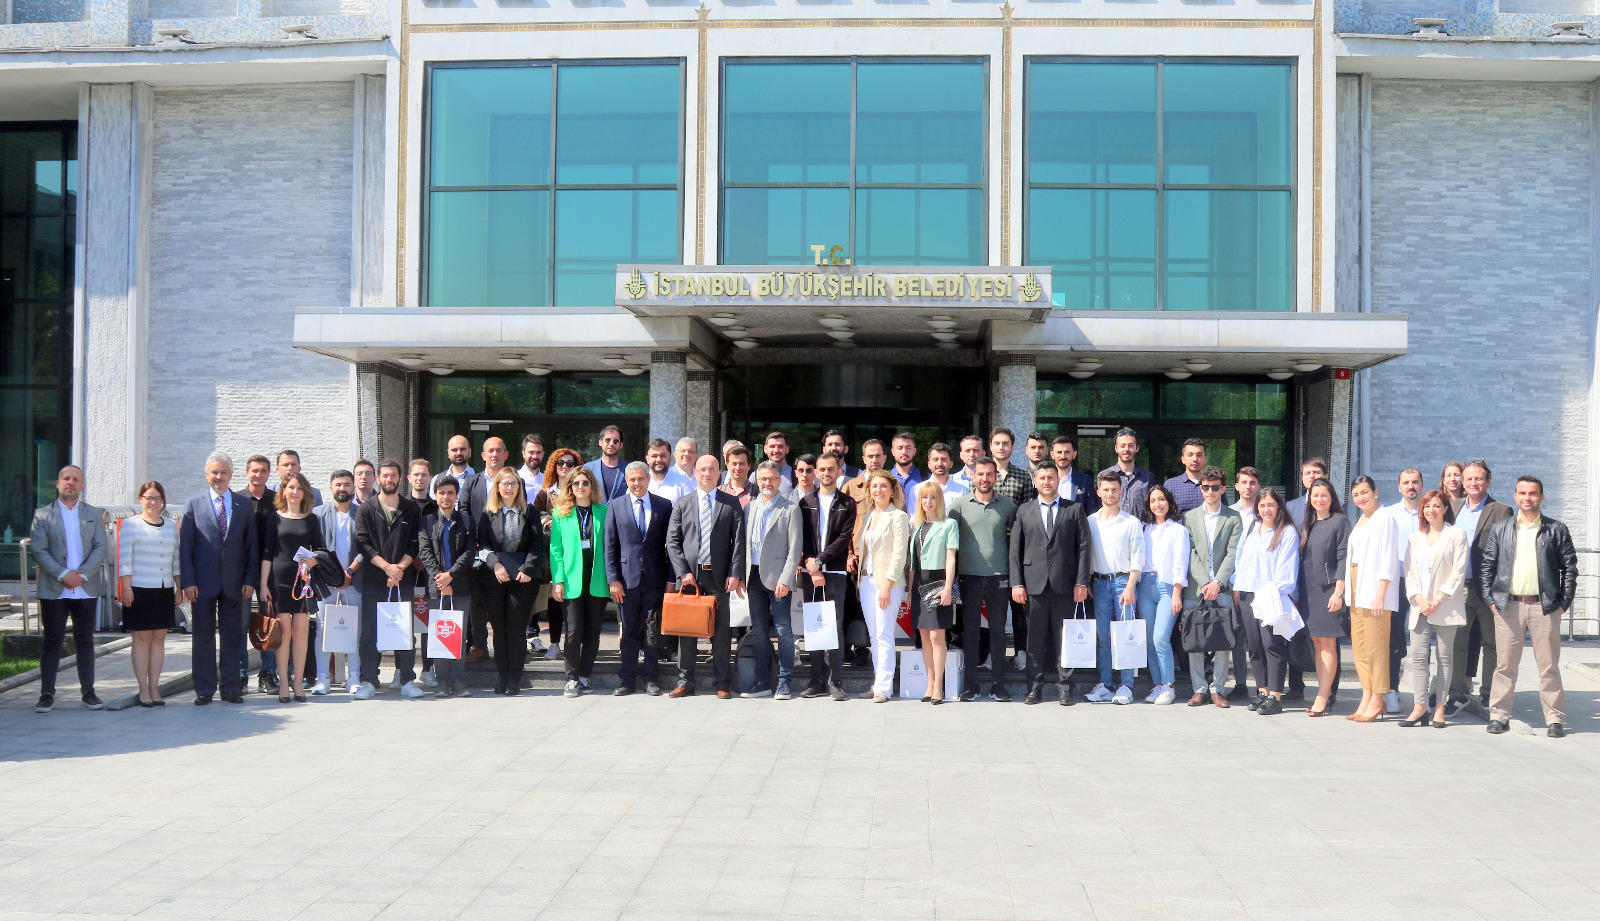 İSTANBUL METROPOLITAN MUNICIPALITY (IMM) ACHIEVES CUTTING-EDGE TECHNOLOGY THROUGH YOUNG TALENTS